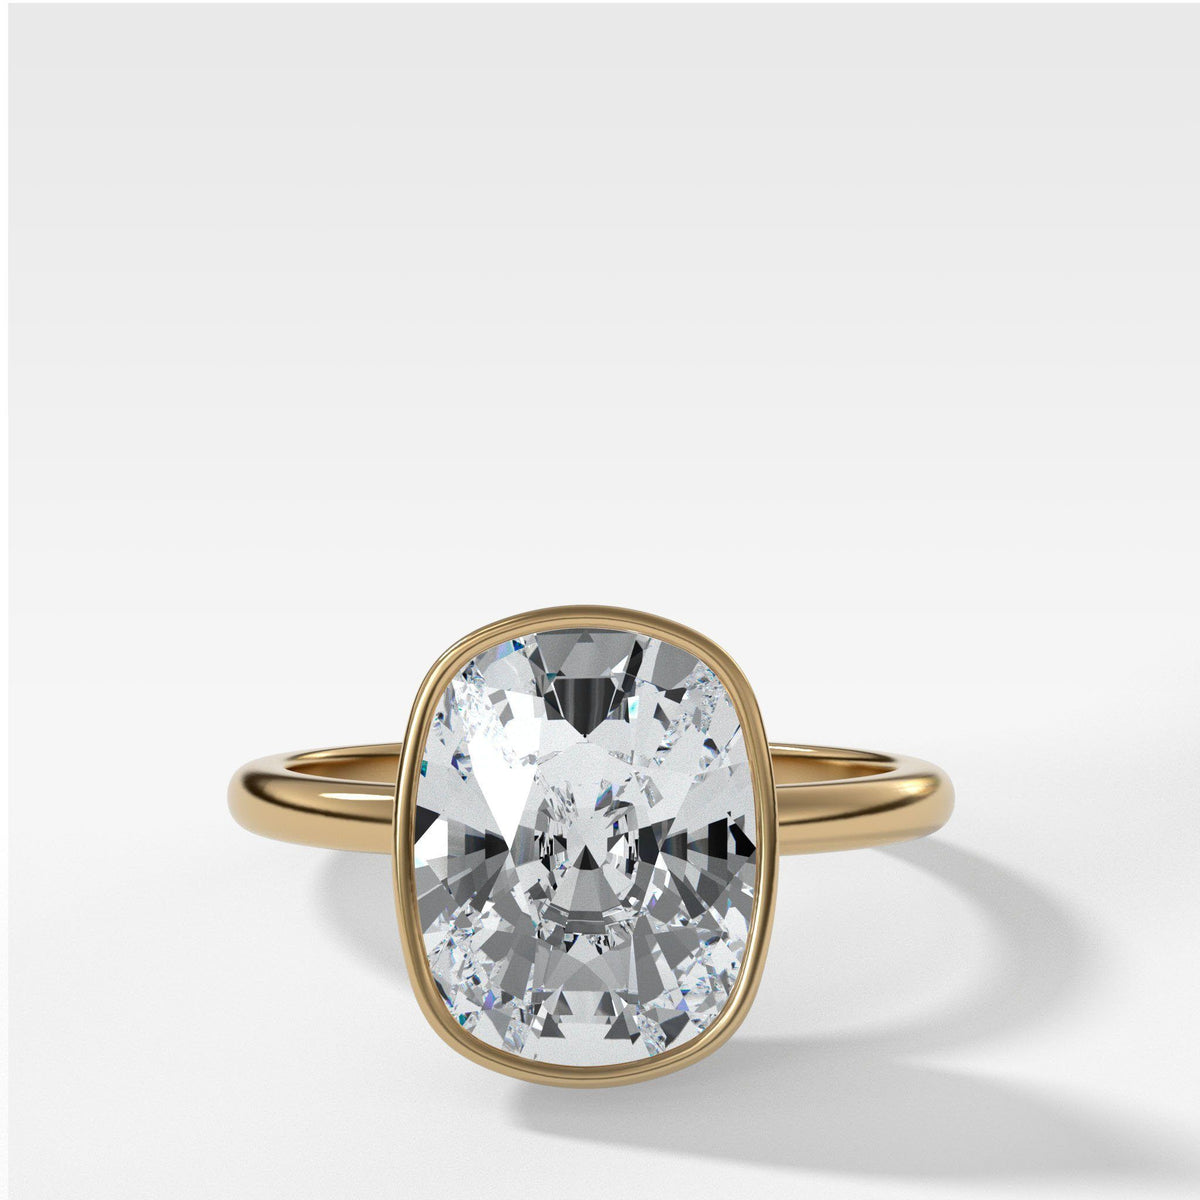 Bezel Penumbra Solitaire With Elongated Cushion Cut by Good Stone in Yellow Gold